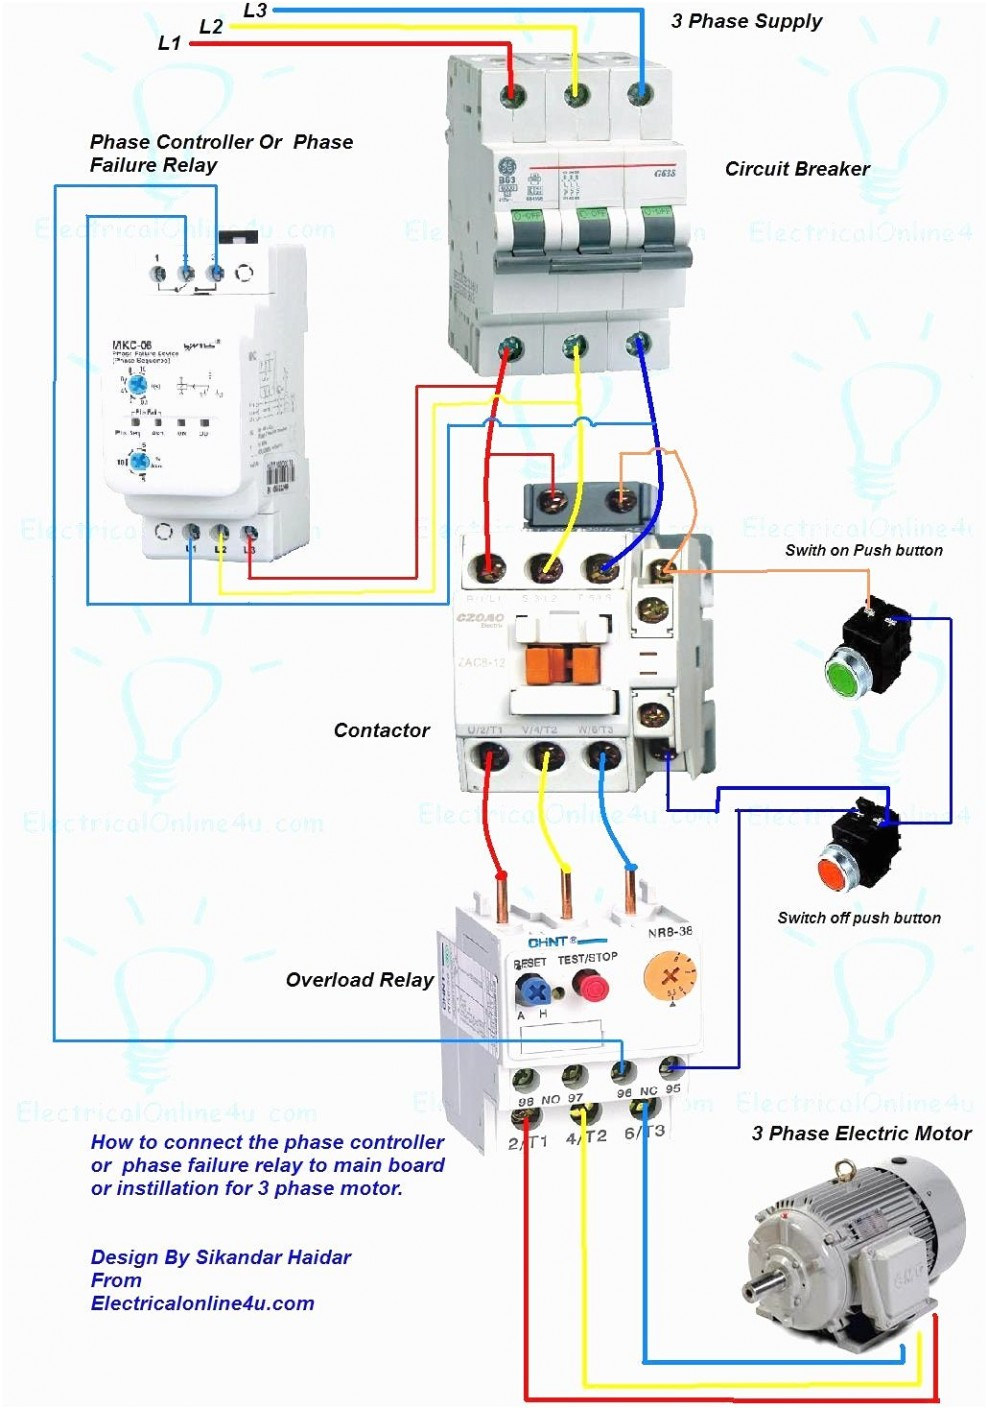 3 phase contactor wiring diagram start stop lc1f225 schneider contactor wiring diagram wiring diagram today of 3 phase contactor wiring diagram start stop jpg